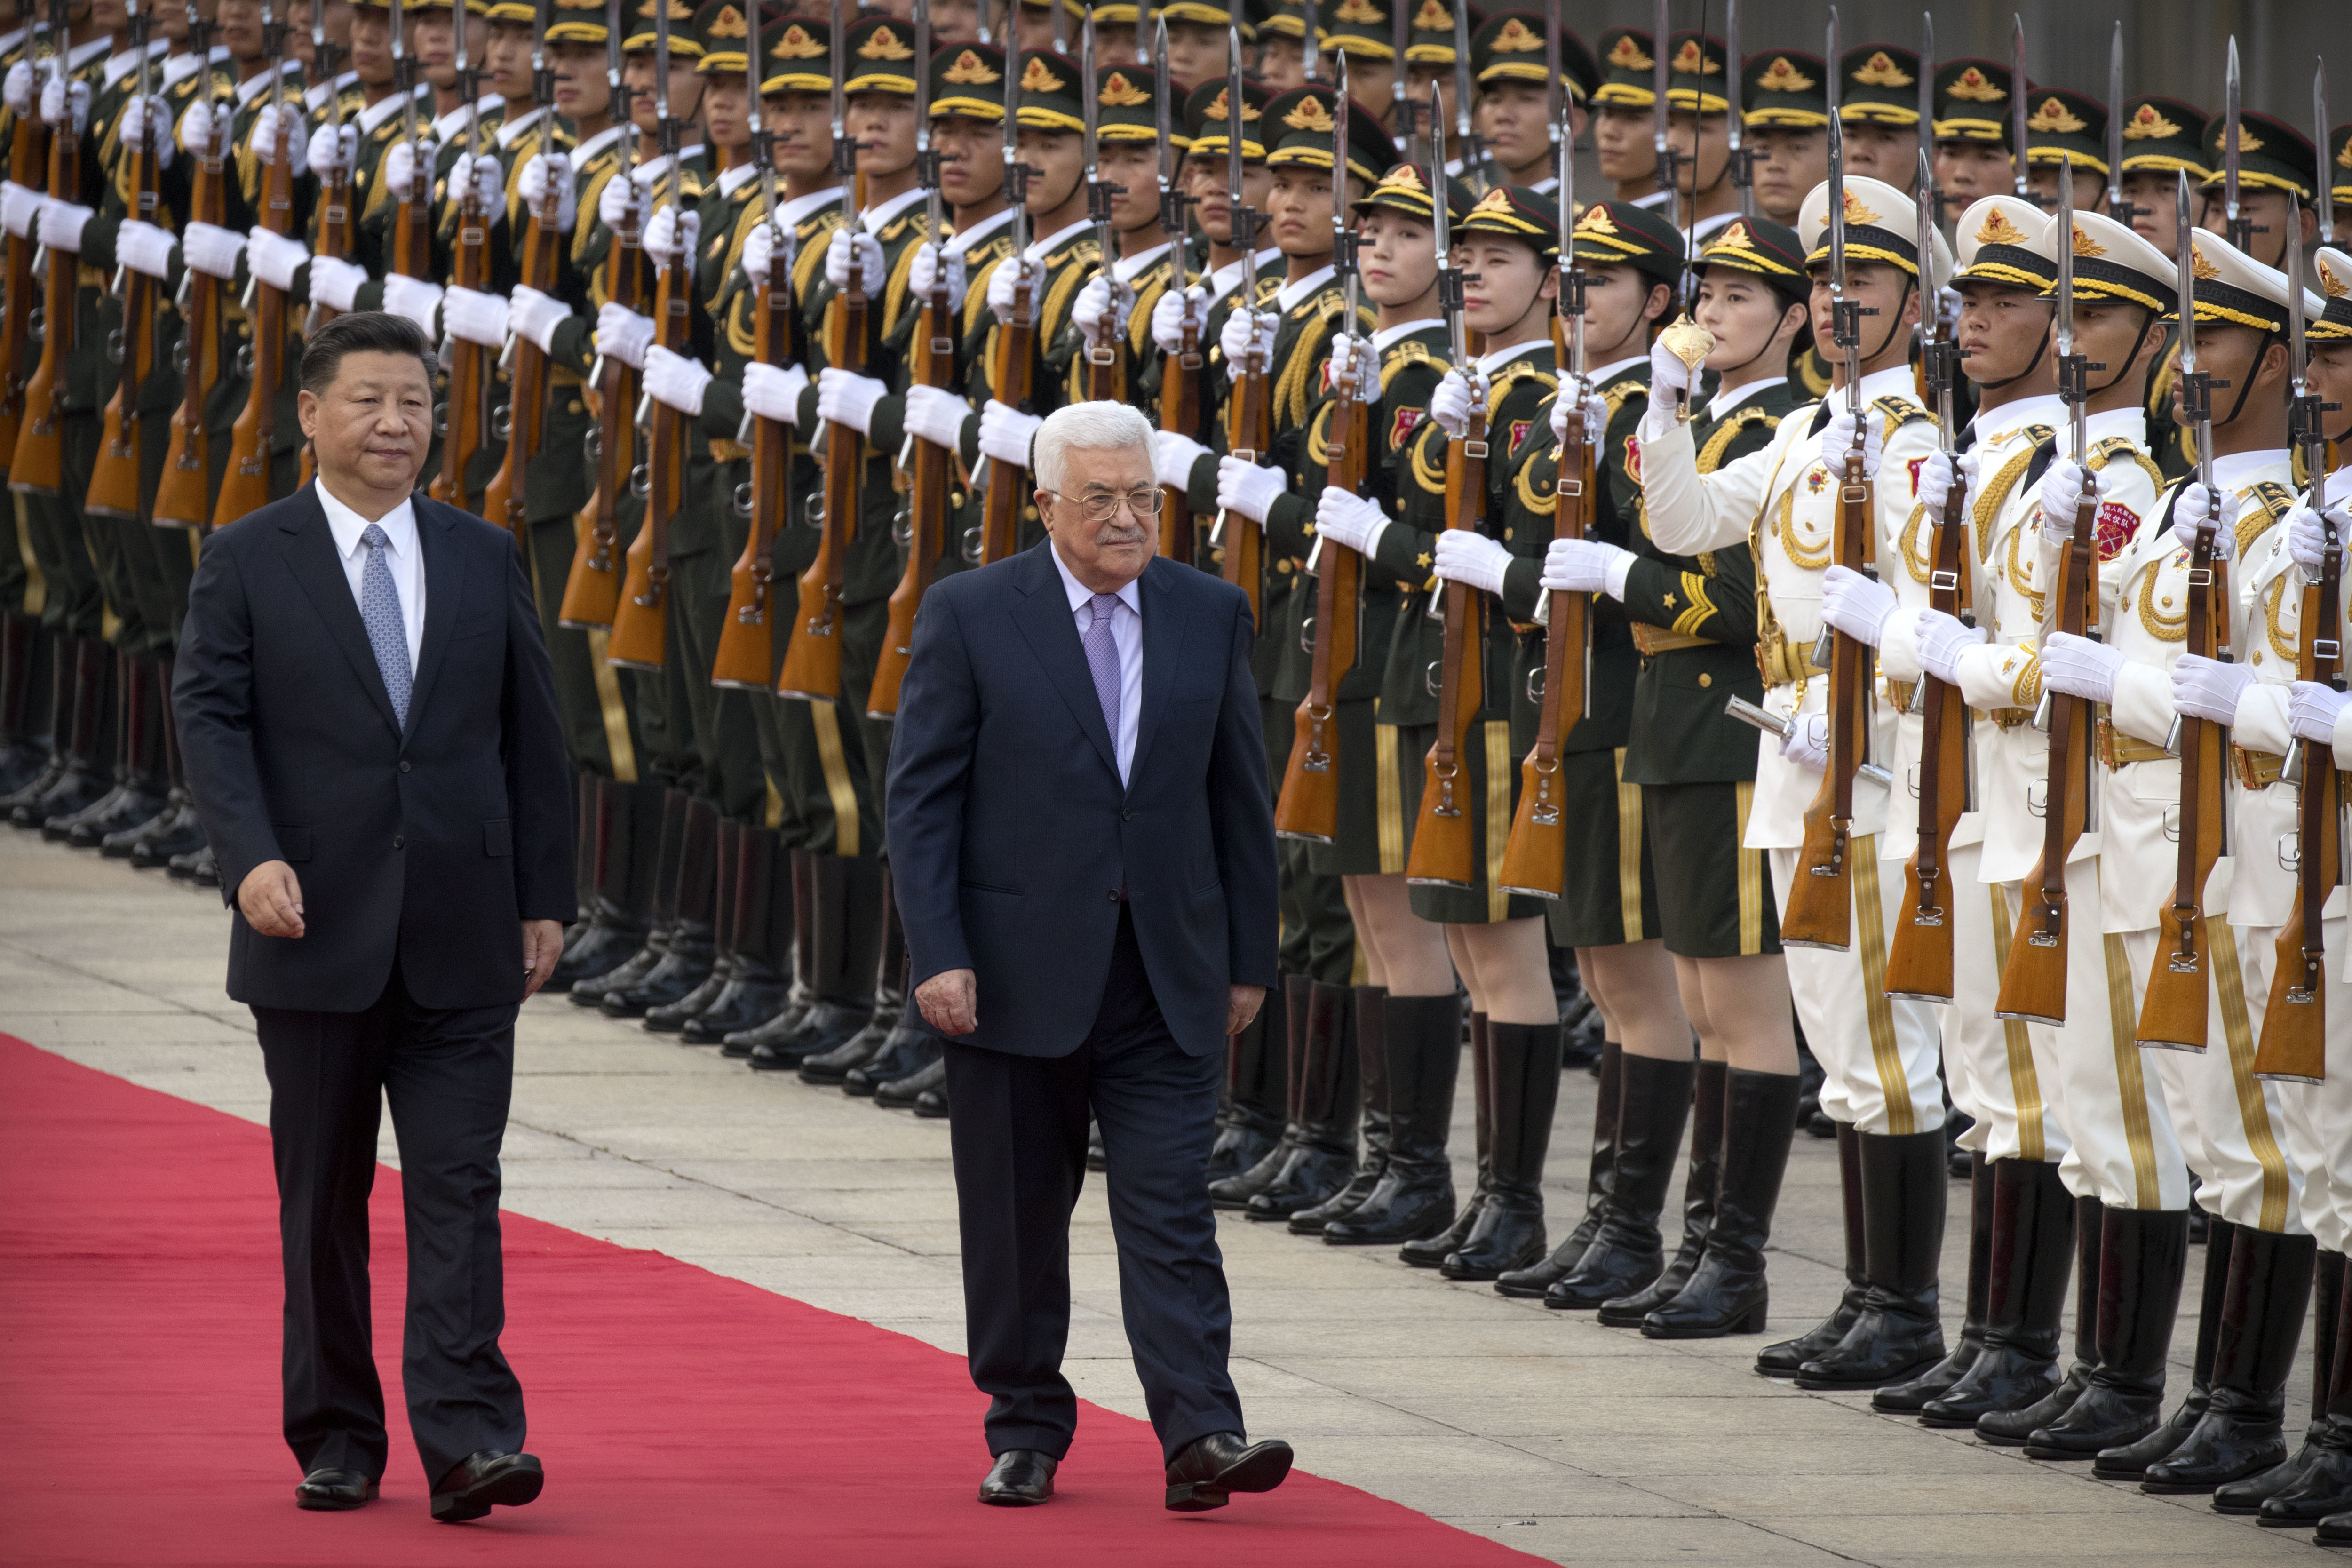 Chinese President Xi Jinping, left, and Palestinian President Mahmoud Abbas reviews an honor guard during a welcome ceremony at the Great Hall of the People in Beijing, Tuesday, July 18, 2017. (AP Photo/Mark Schiefelbein)